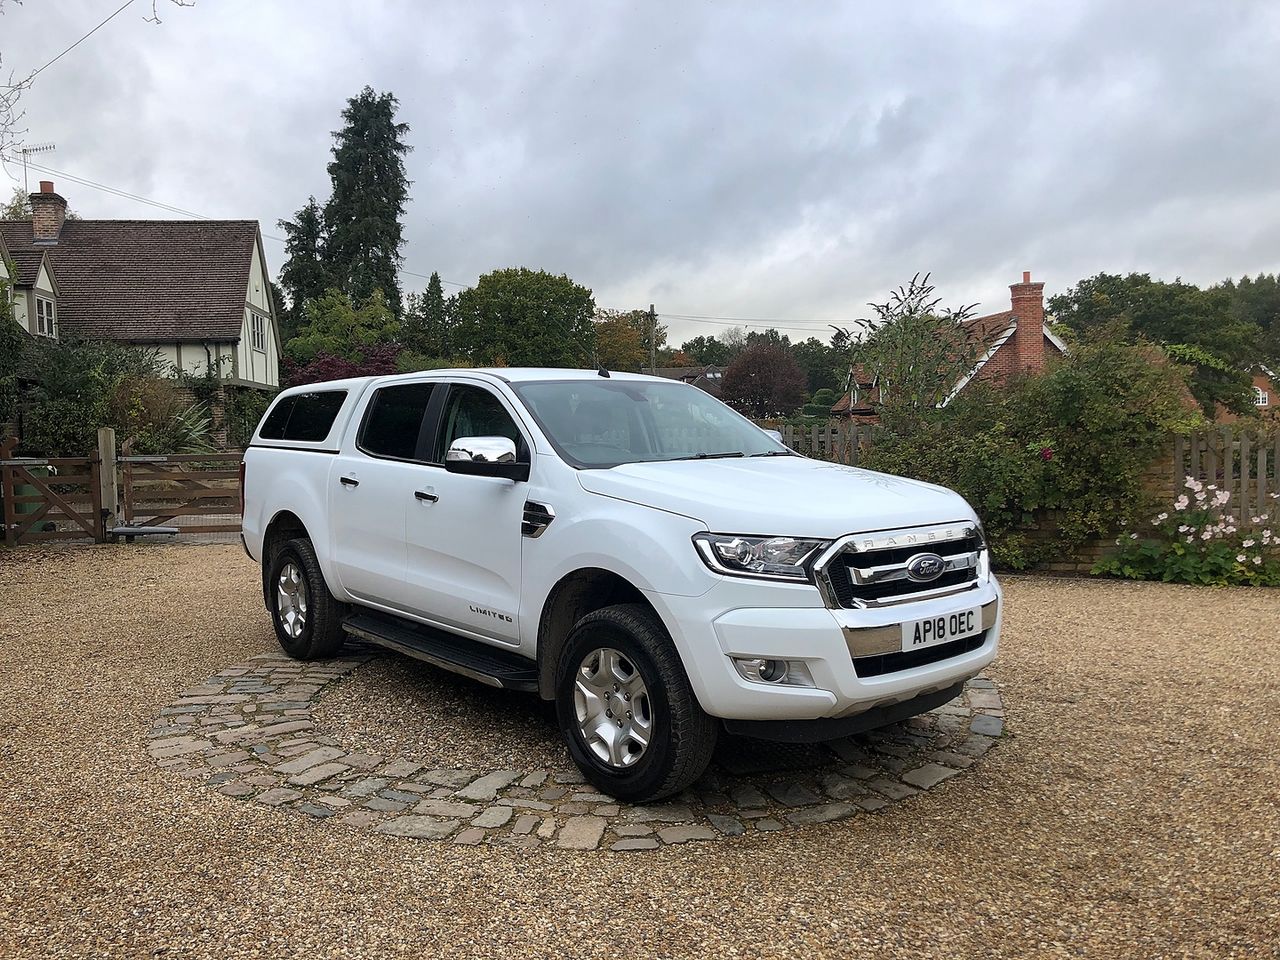 2018 FORD Ranger Double Cab 4x4 Limited 2 2.2TDCi 160PS A - Picture 1 of 13